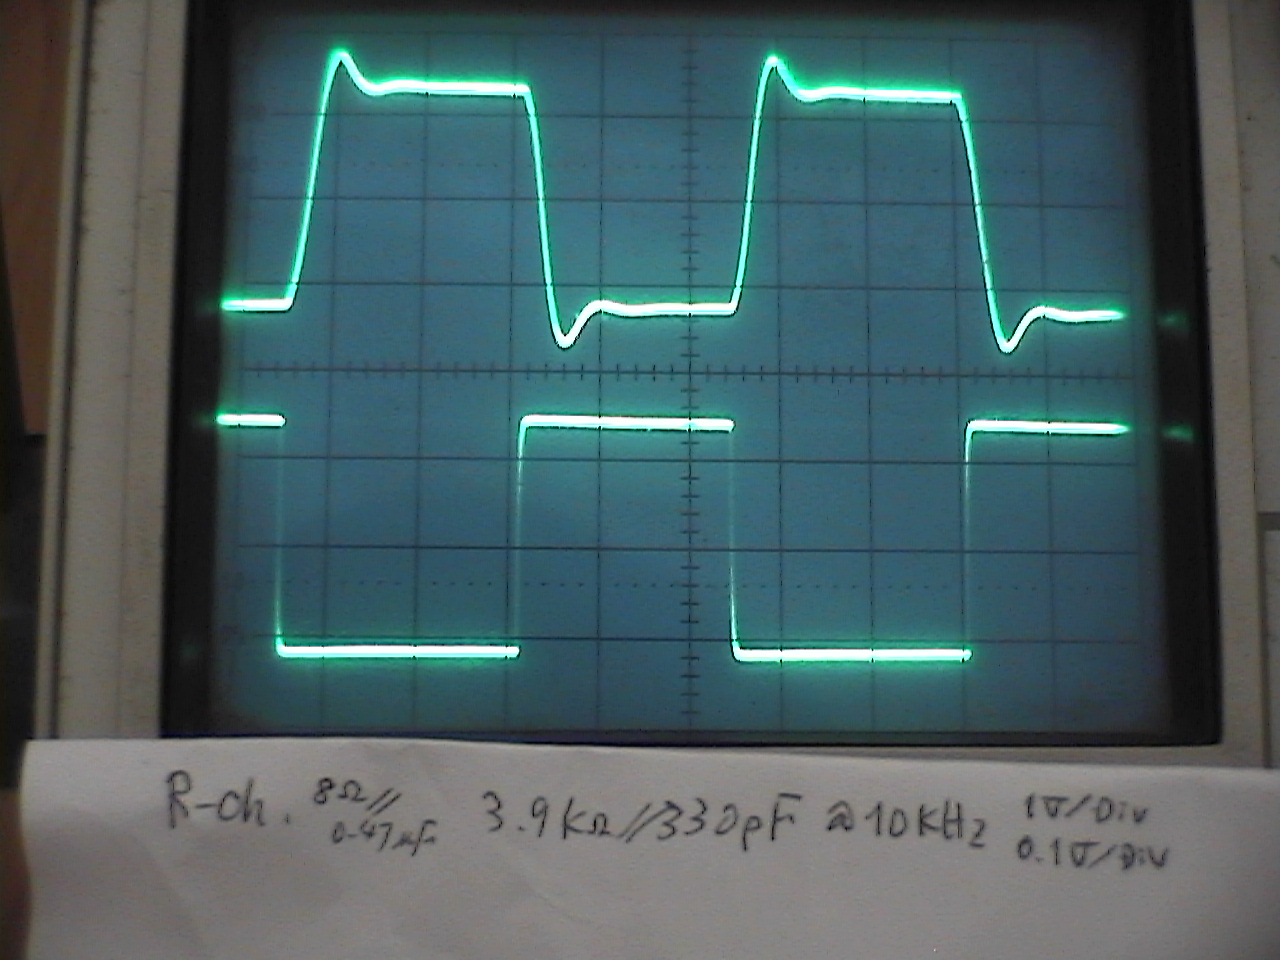 10kHz square wave response into load of 8ohm//0.47uF